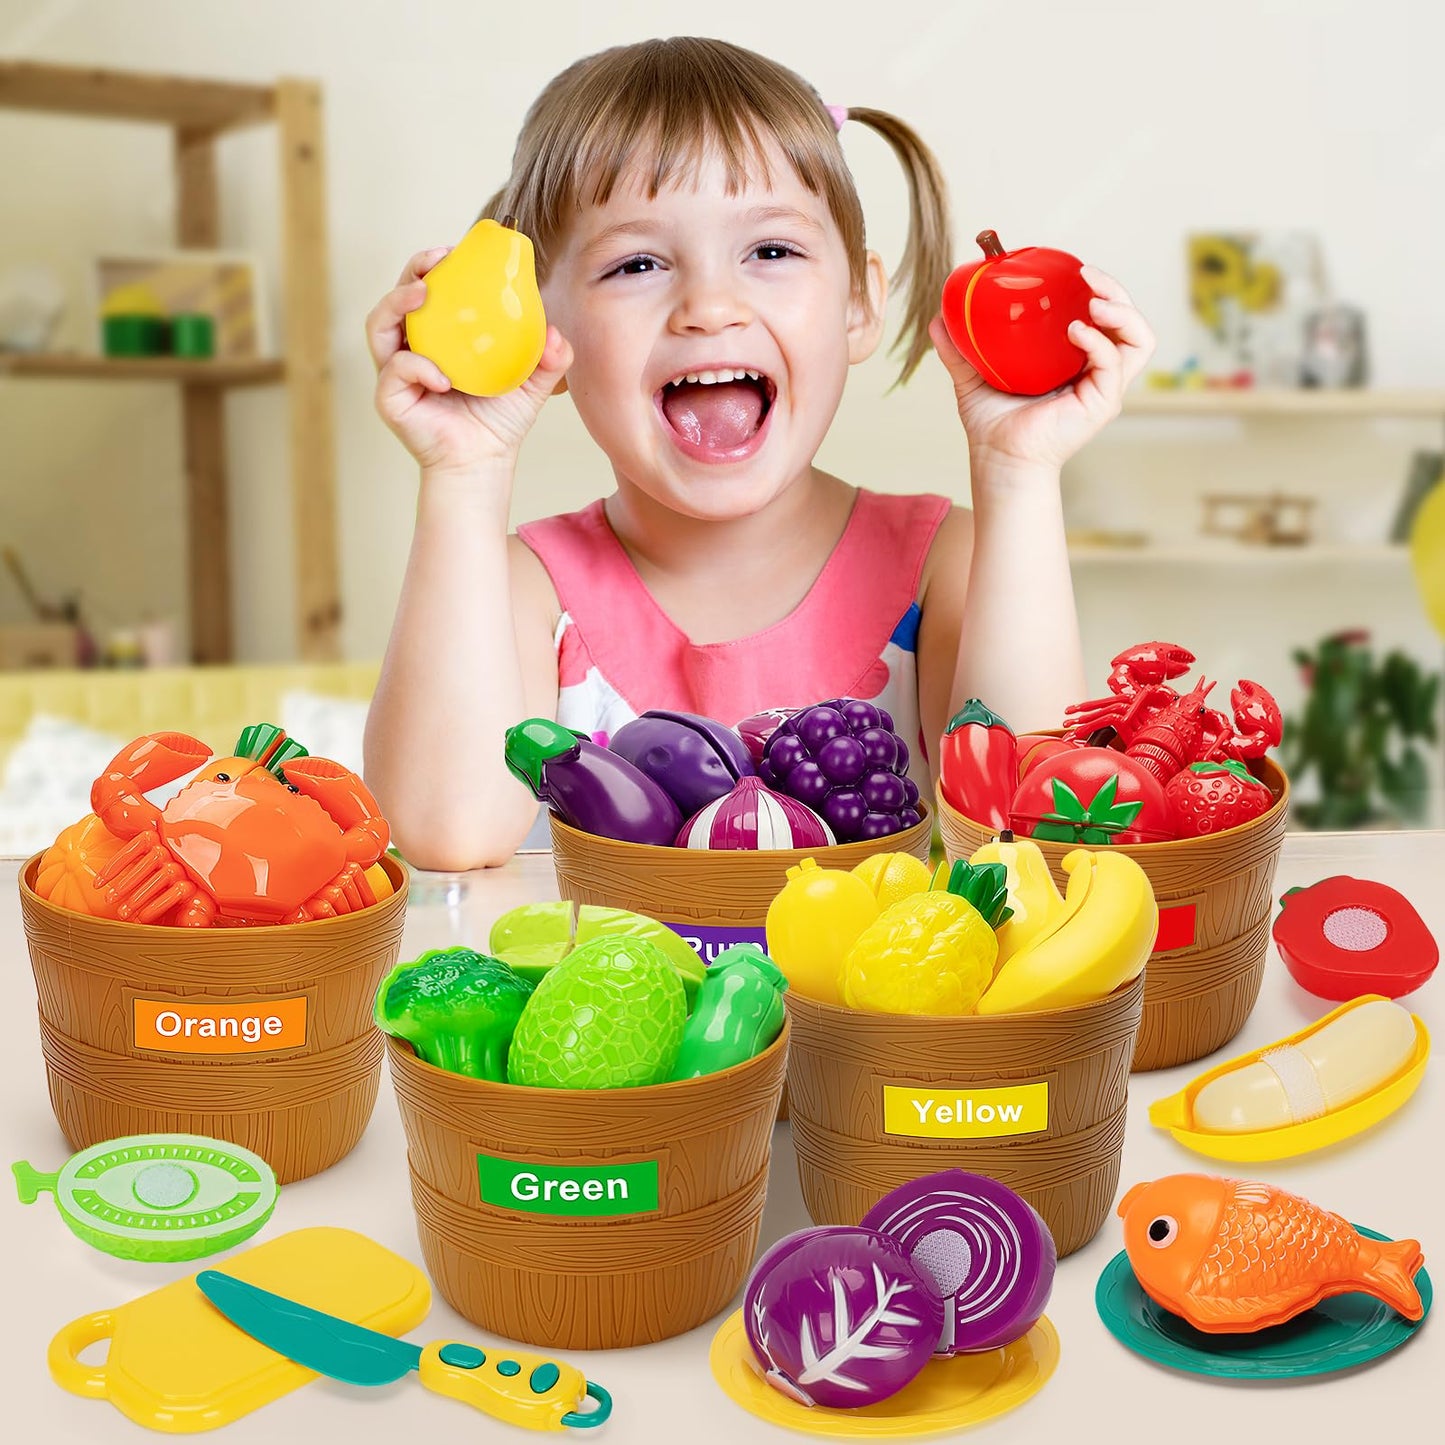 TooyBing Play Food Set for Kids Kitchen- 68 Pcs Pretend Kitchen Food Toy for Toddlers, Cutting & Color Sorting Fake Food/ Fruit/ Vegetable Accessories, Birthday Gifts for 2 3 4 5 Years Old Boys Girls